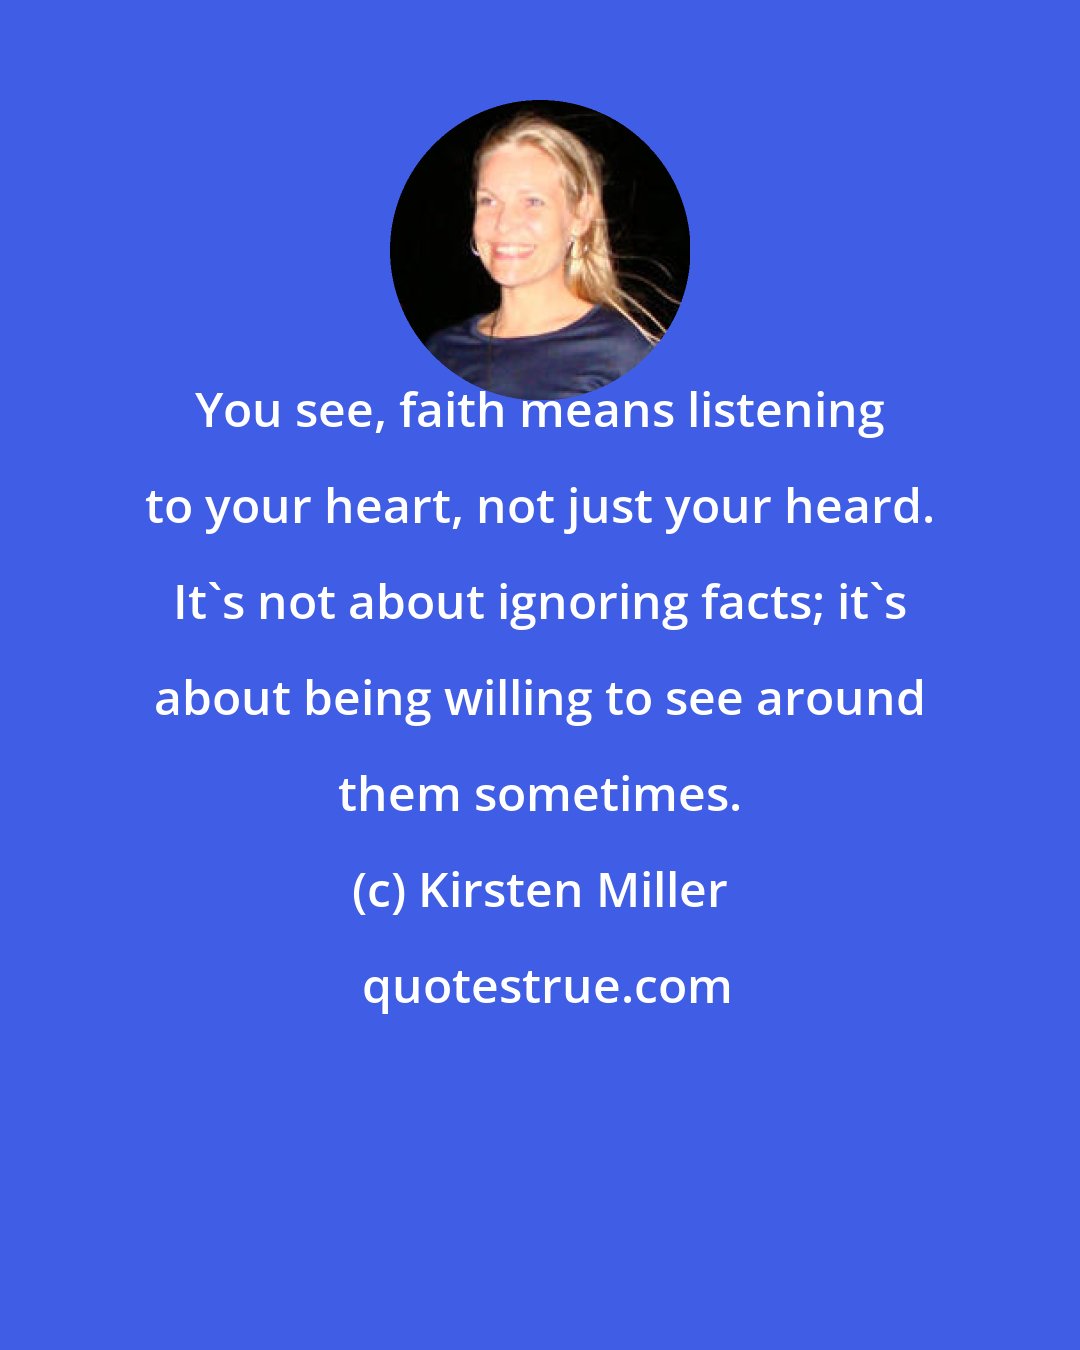 Kirsten Miller: You see, faith means listening to your heart, not just your heard. It's not about ignoring facts; it's about being willing to see around them sometimes.